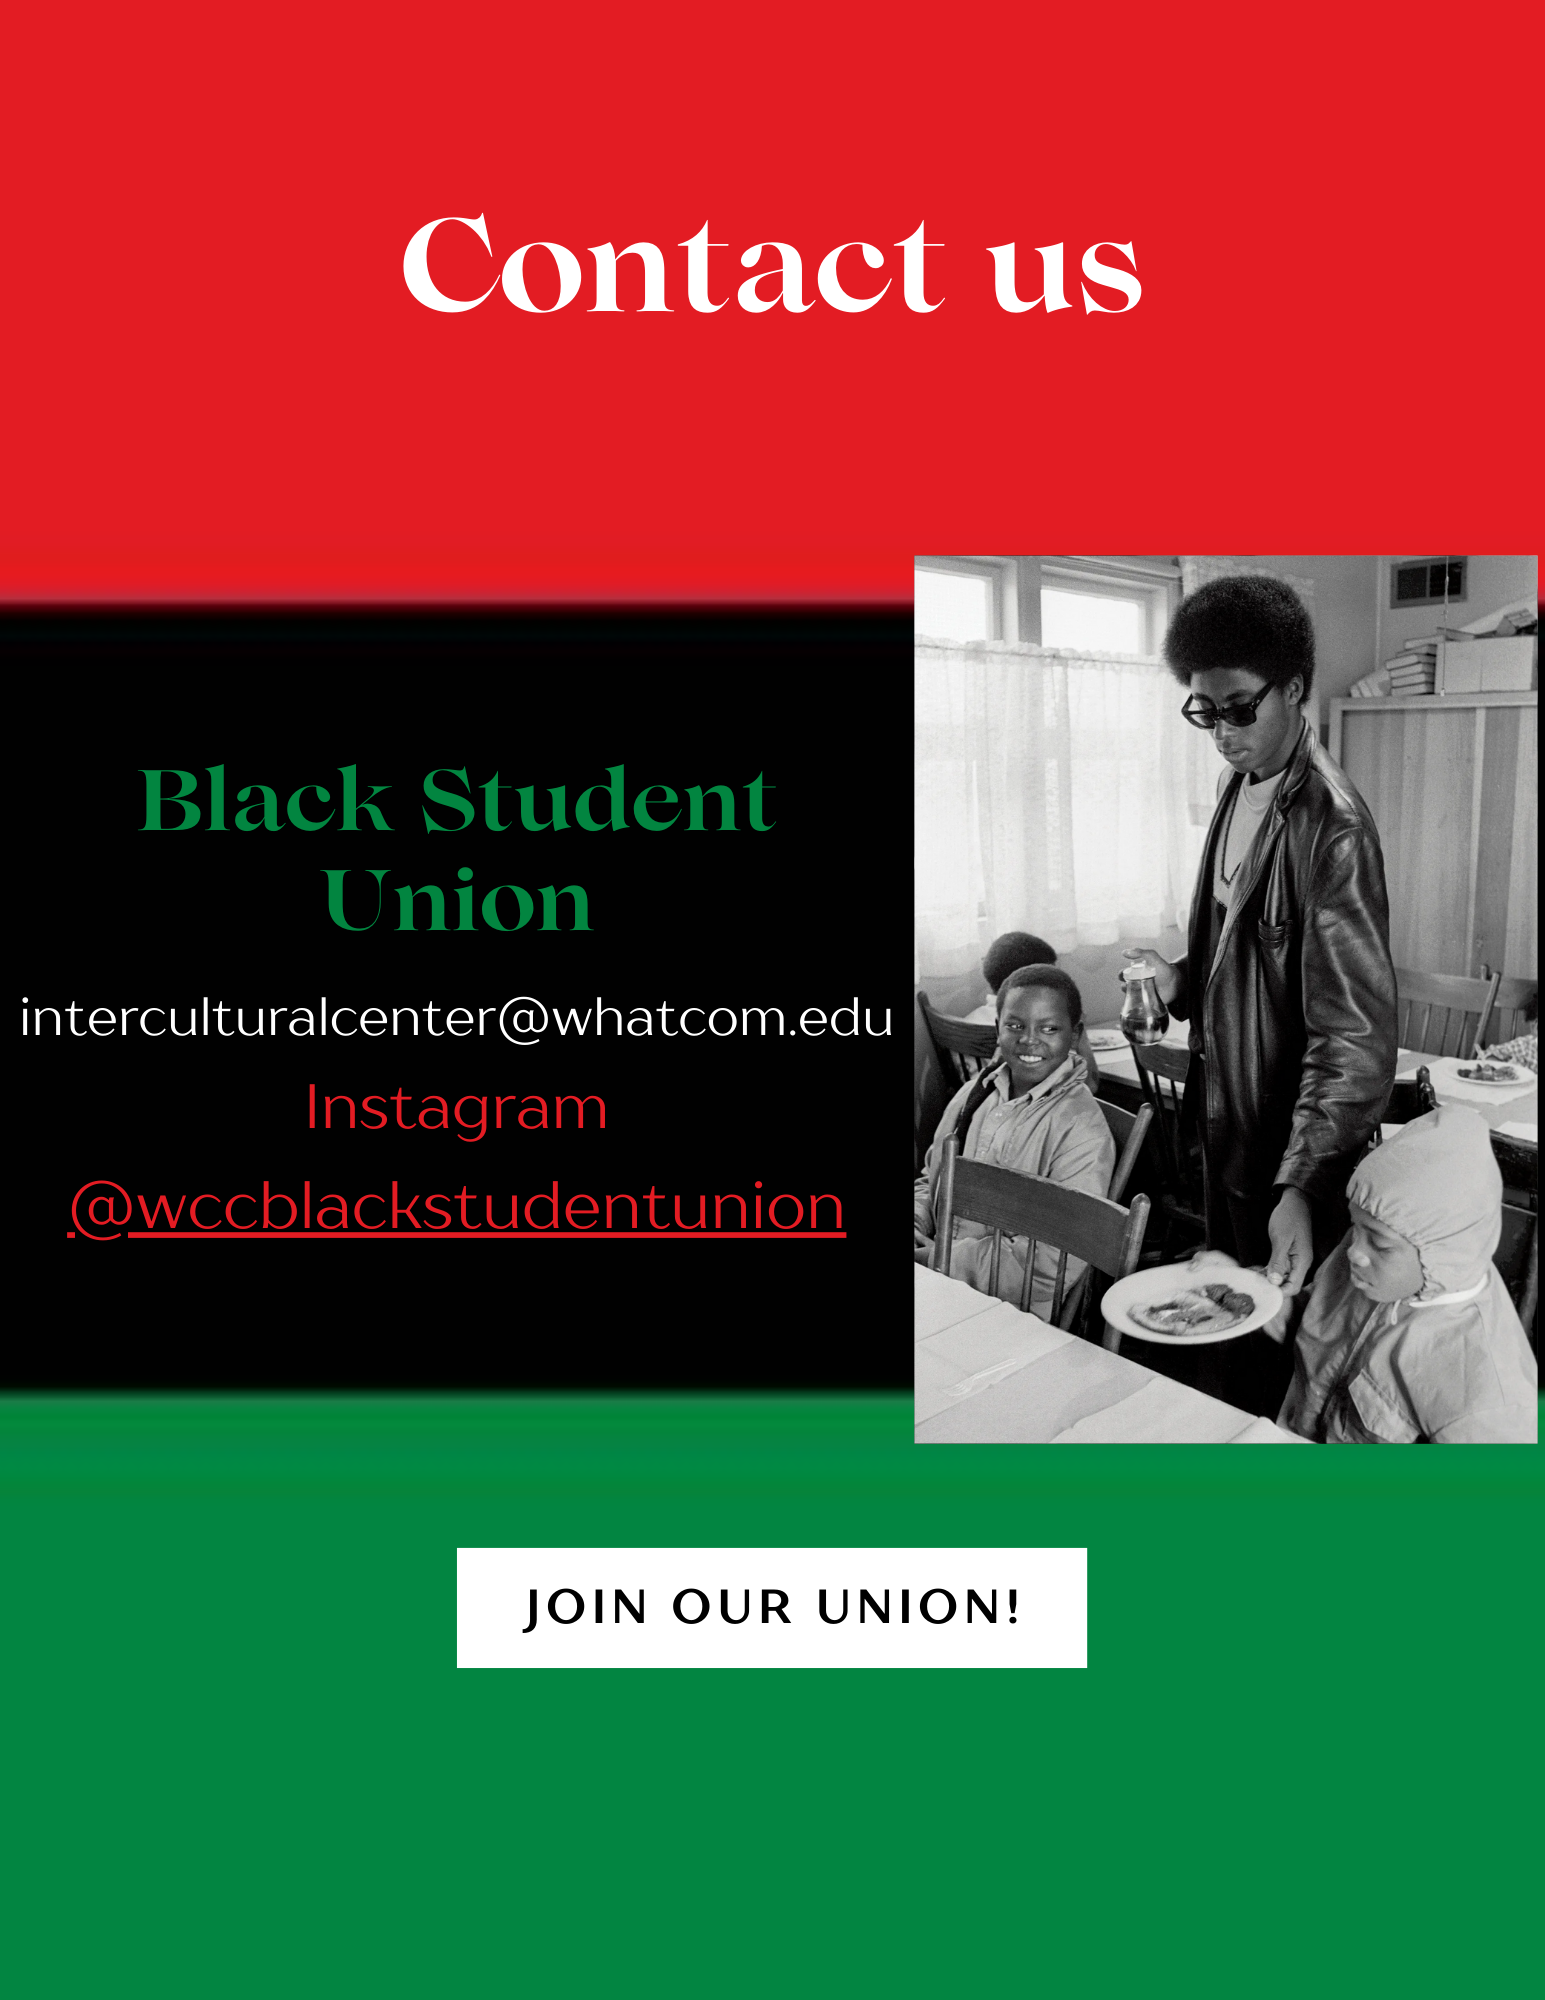 BSU Contact Us (8.5 x 11 in)